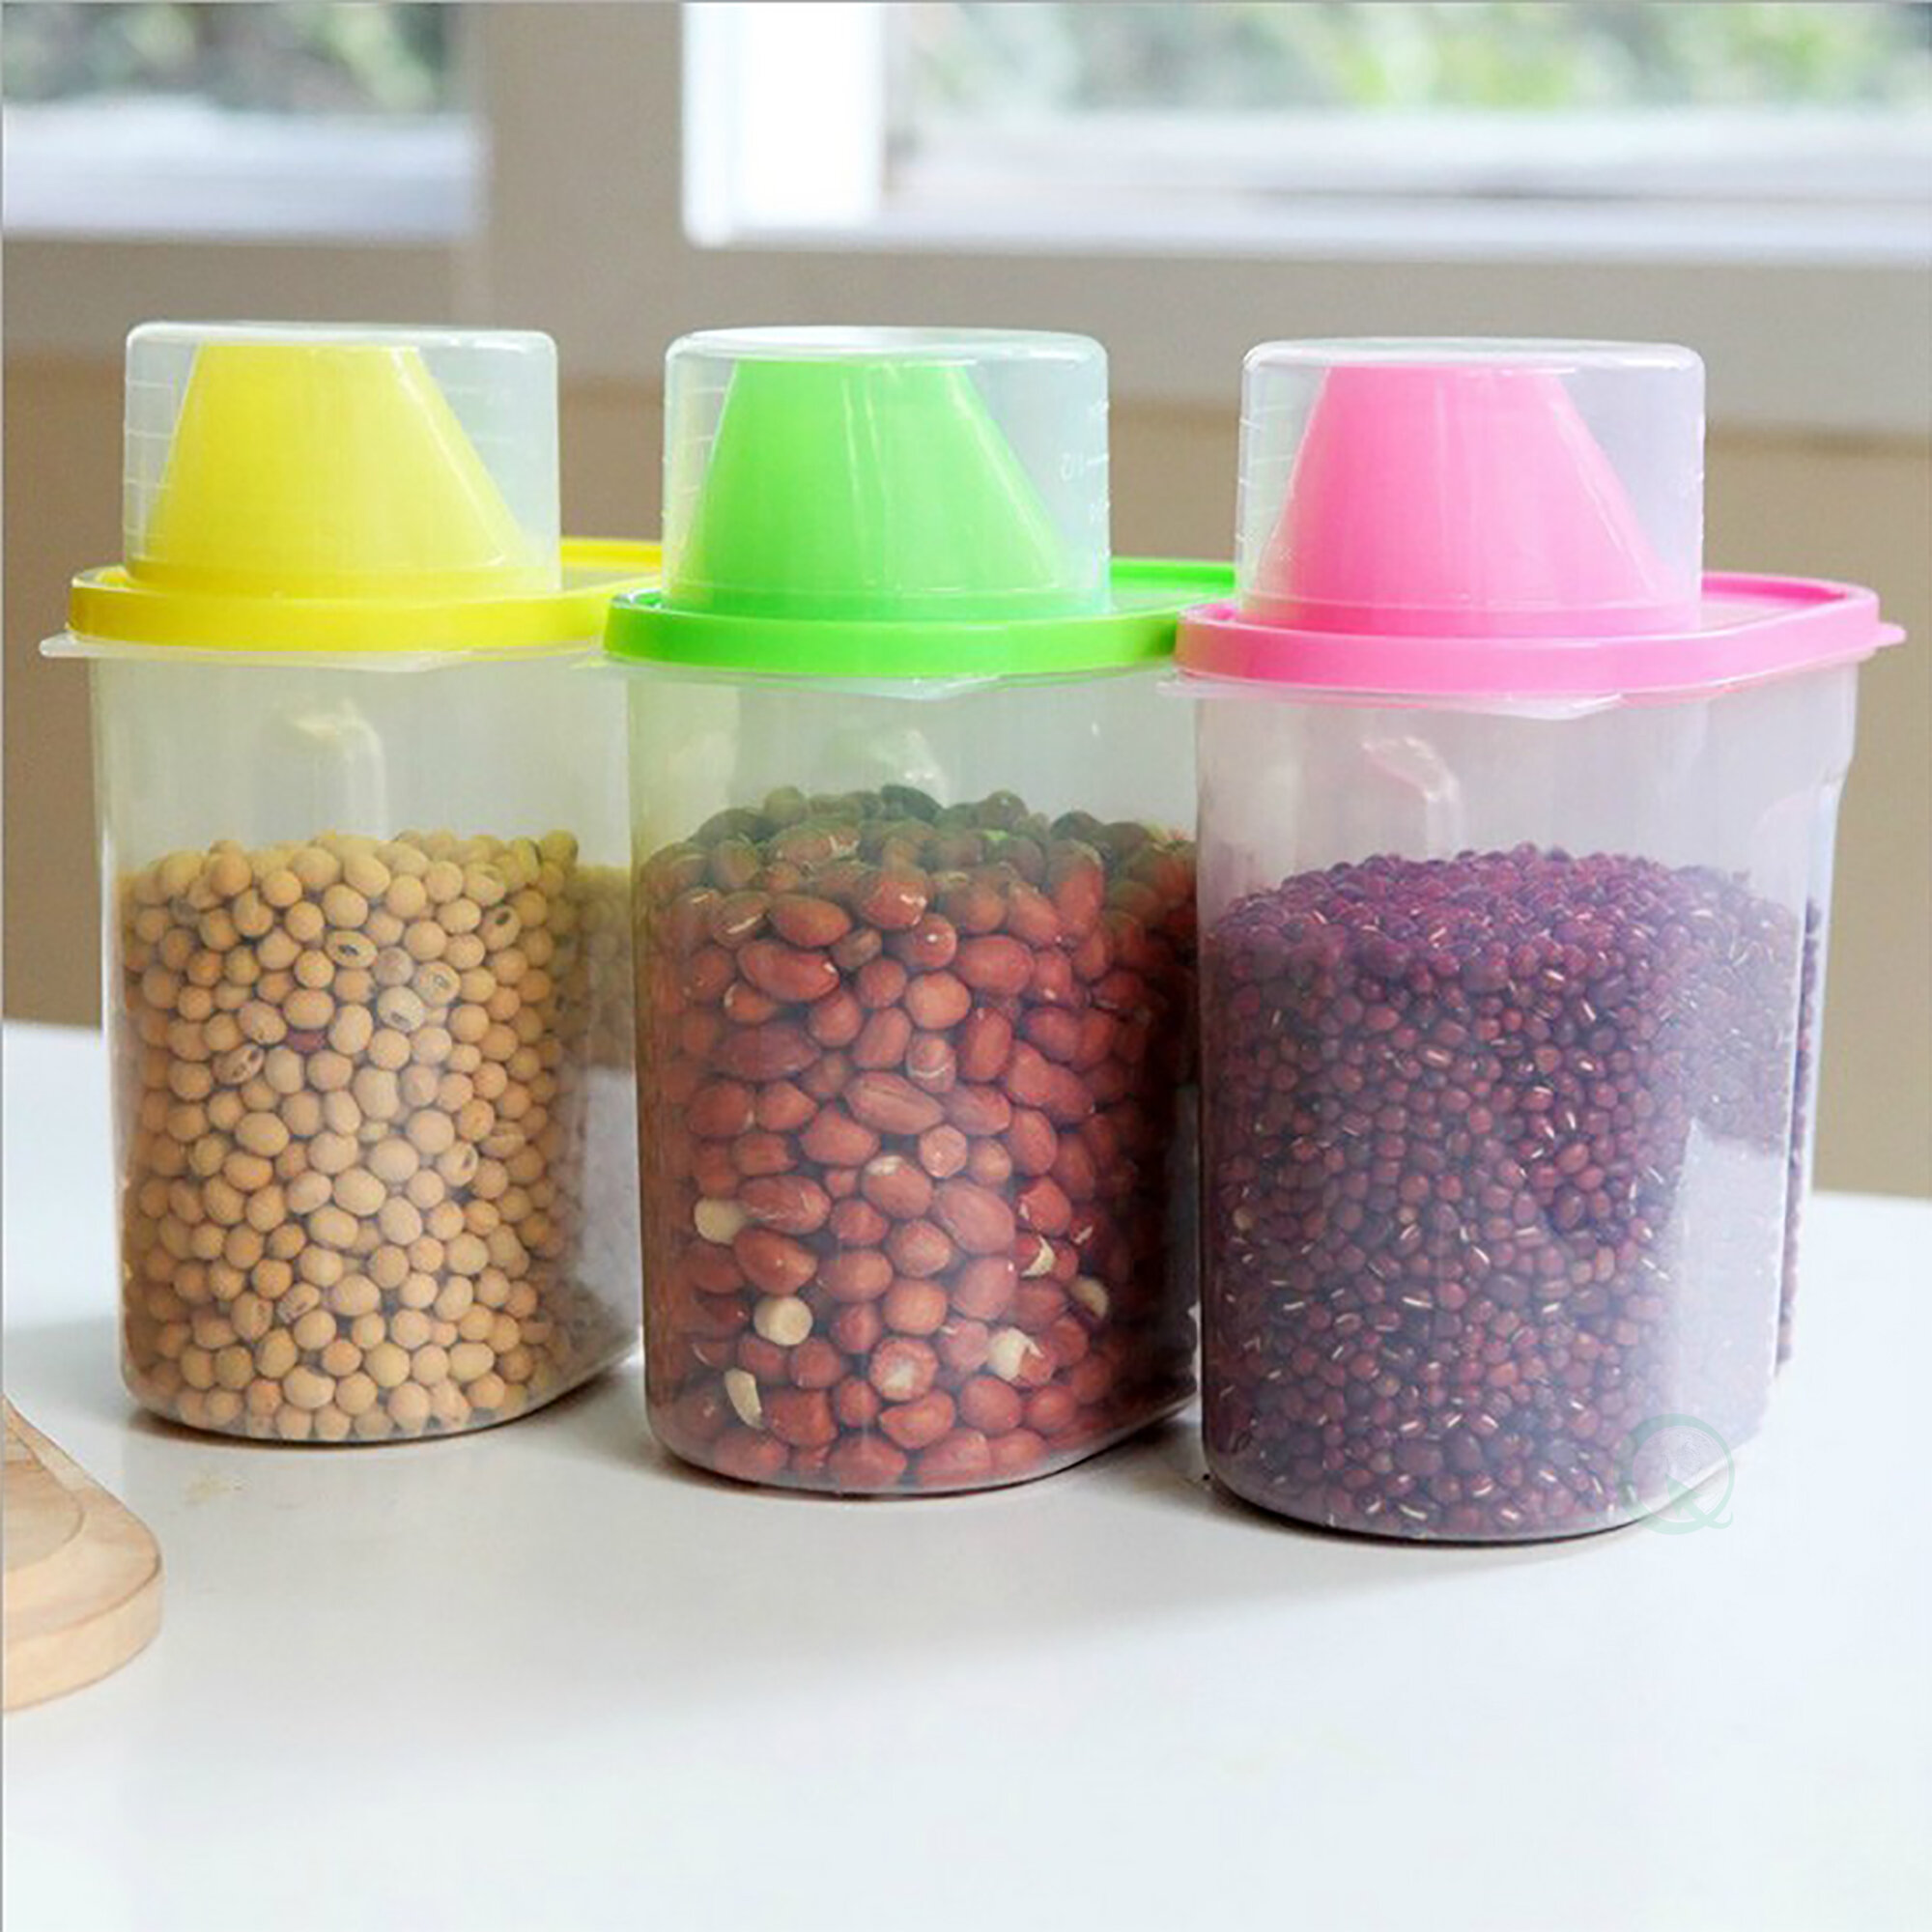 Basicwise Small Plastic Kitchen Saver 3 Container Food Storage Set